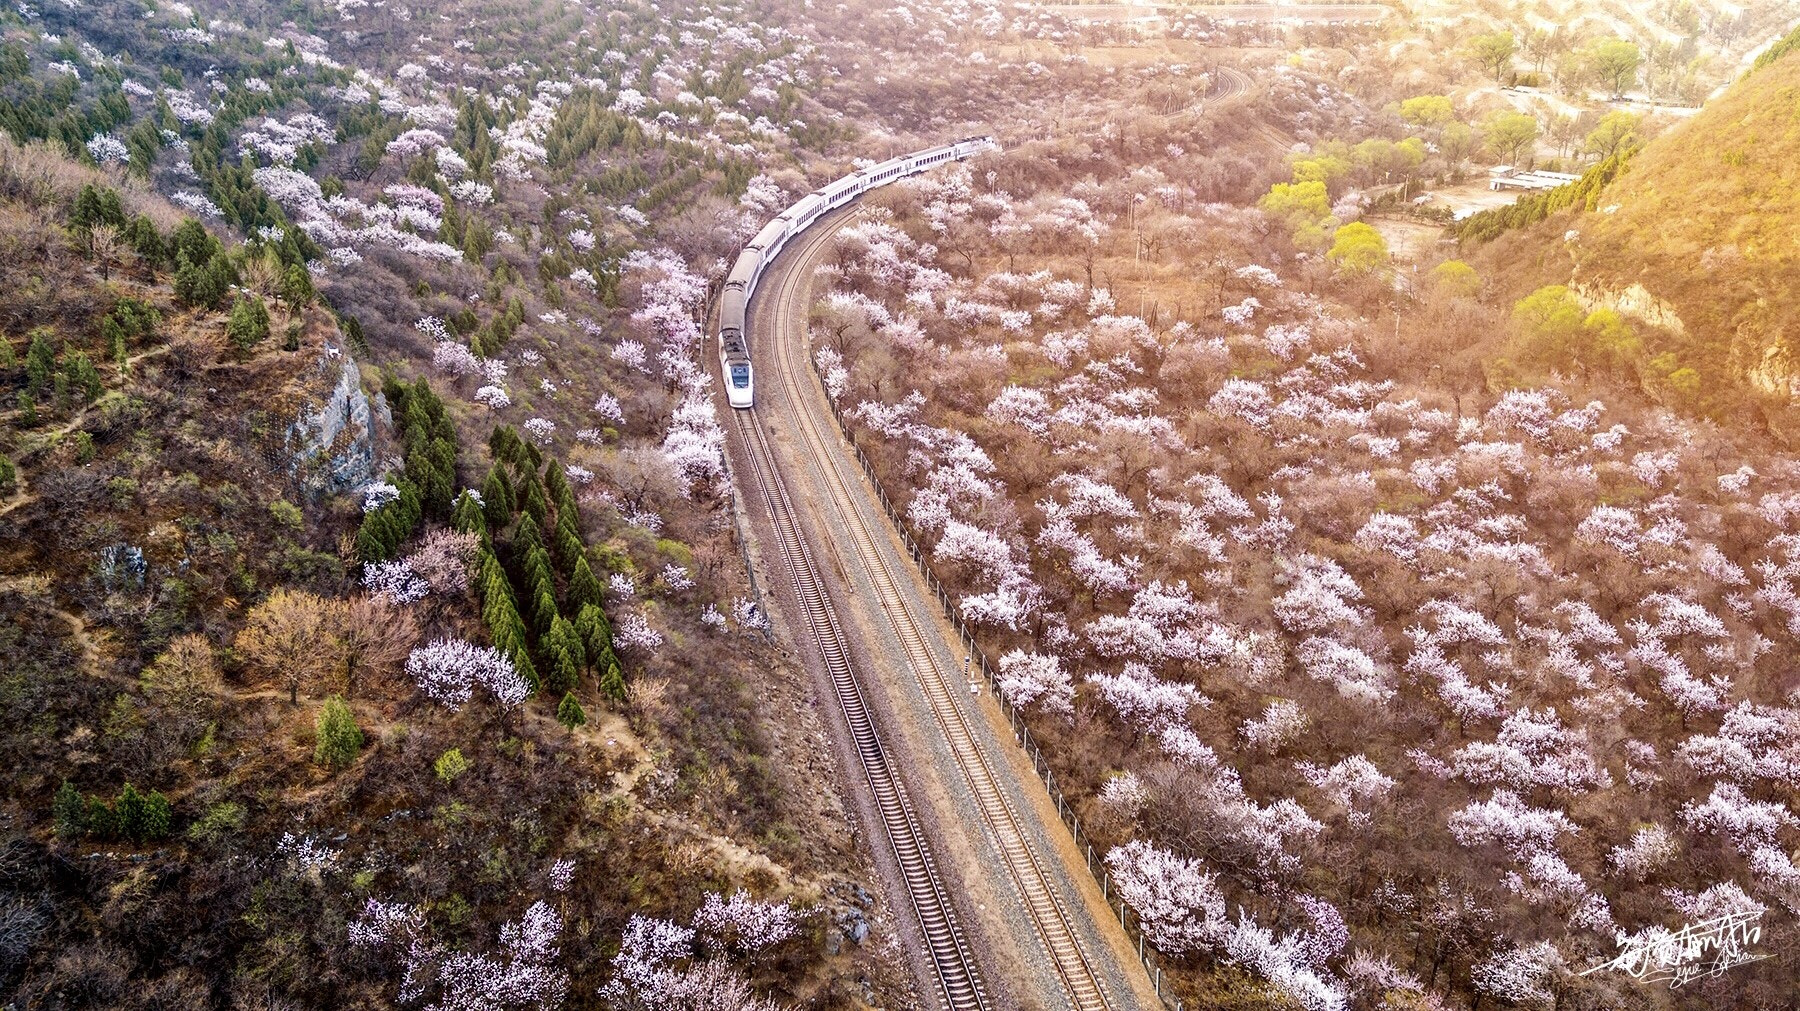 DJI FC550 sample photo. A train for spring photography